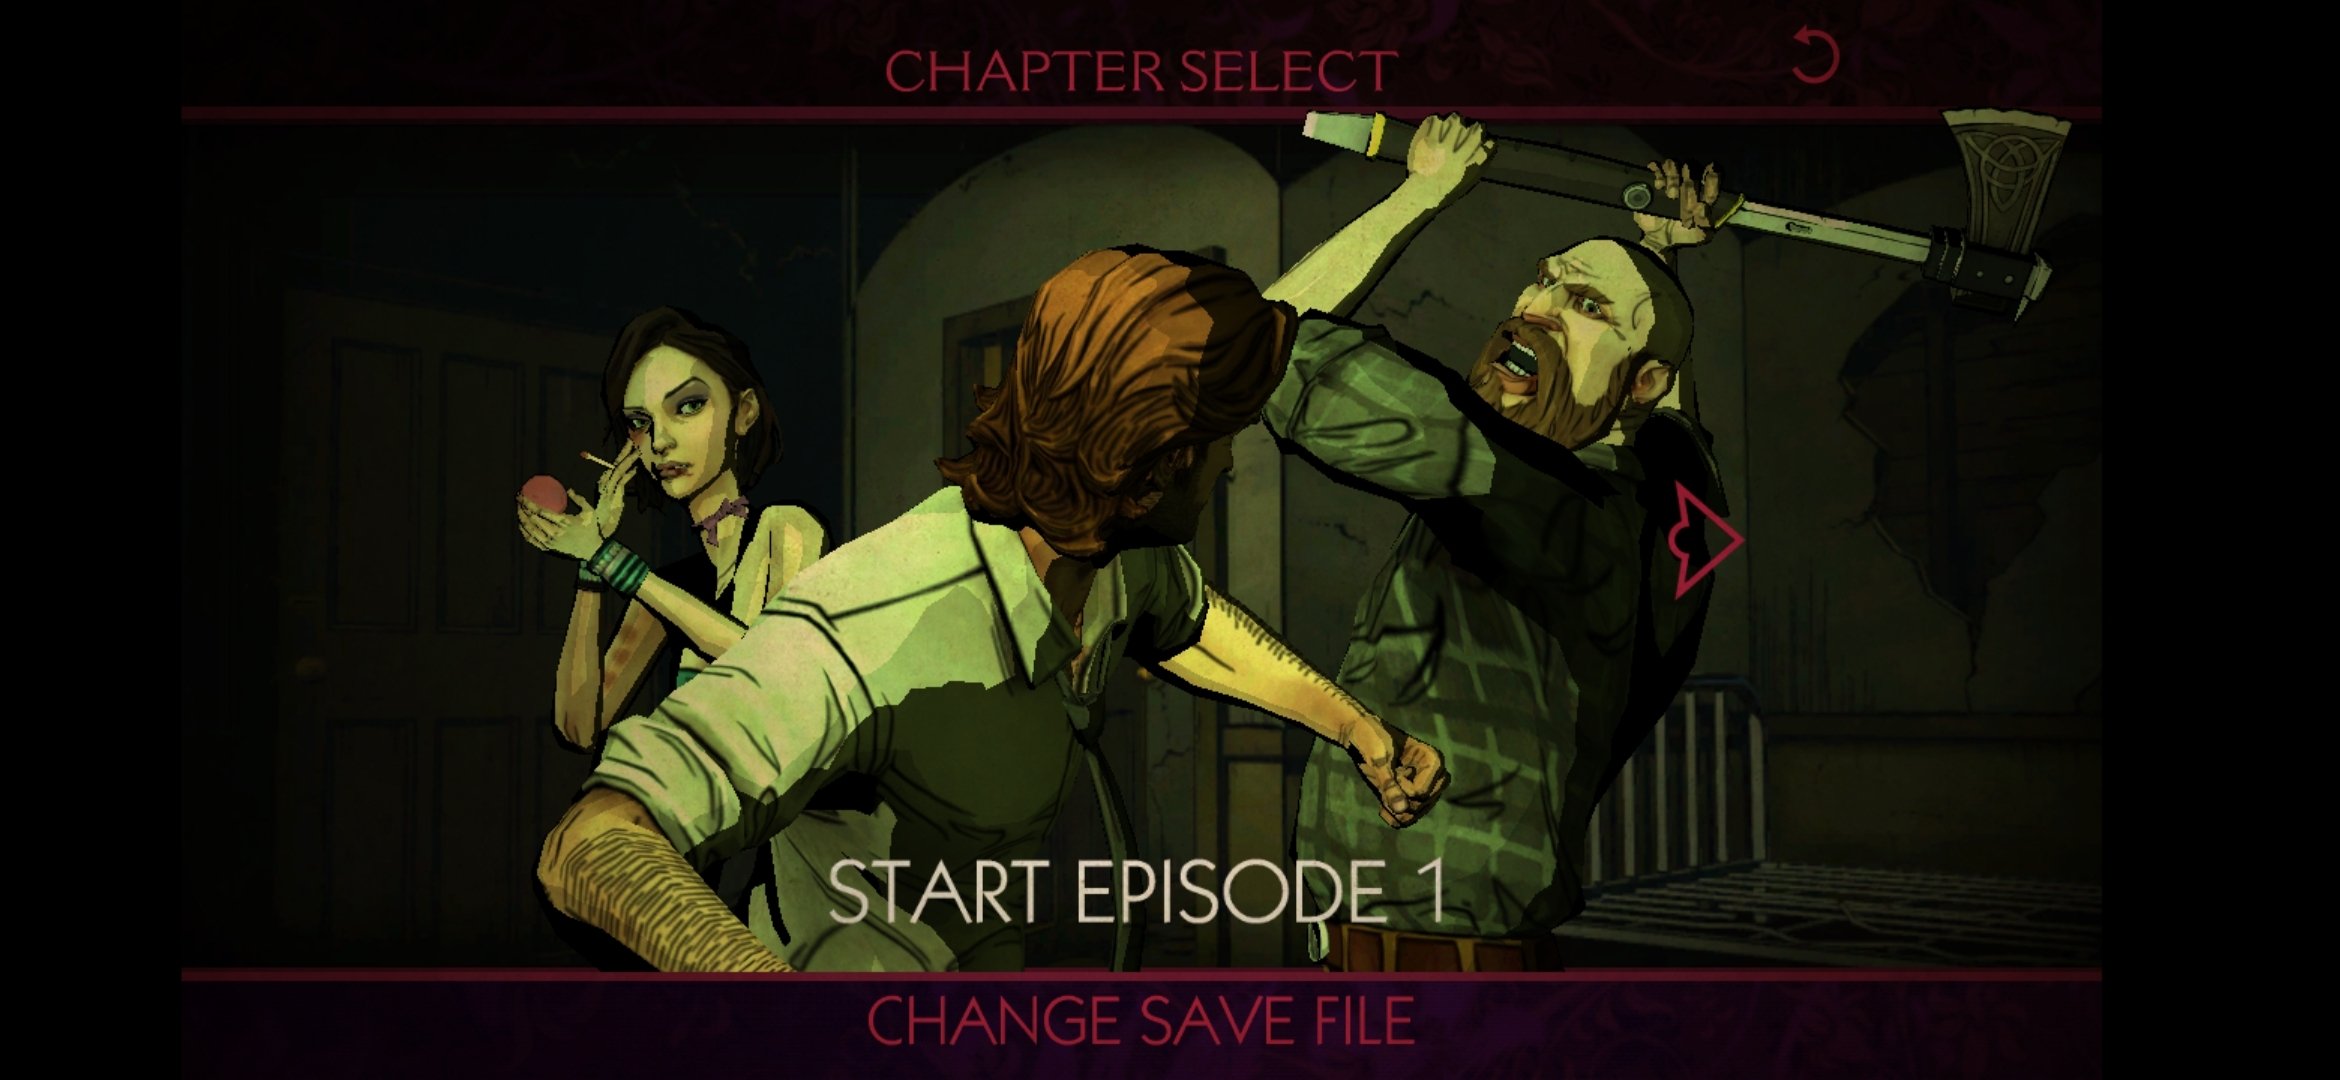 will there be another the wolf among us game 2